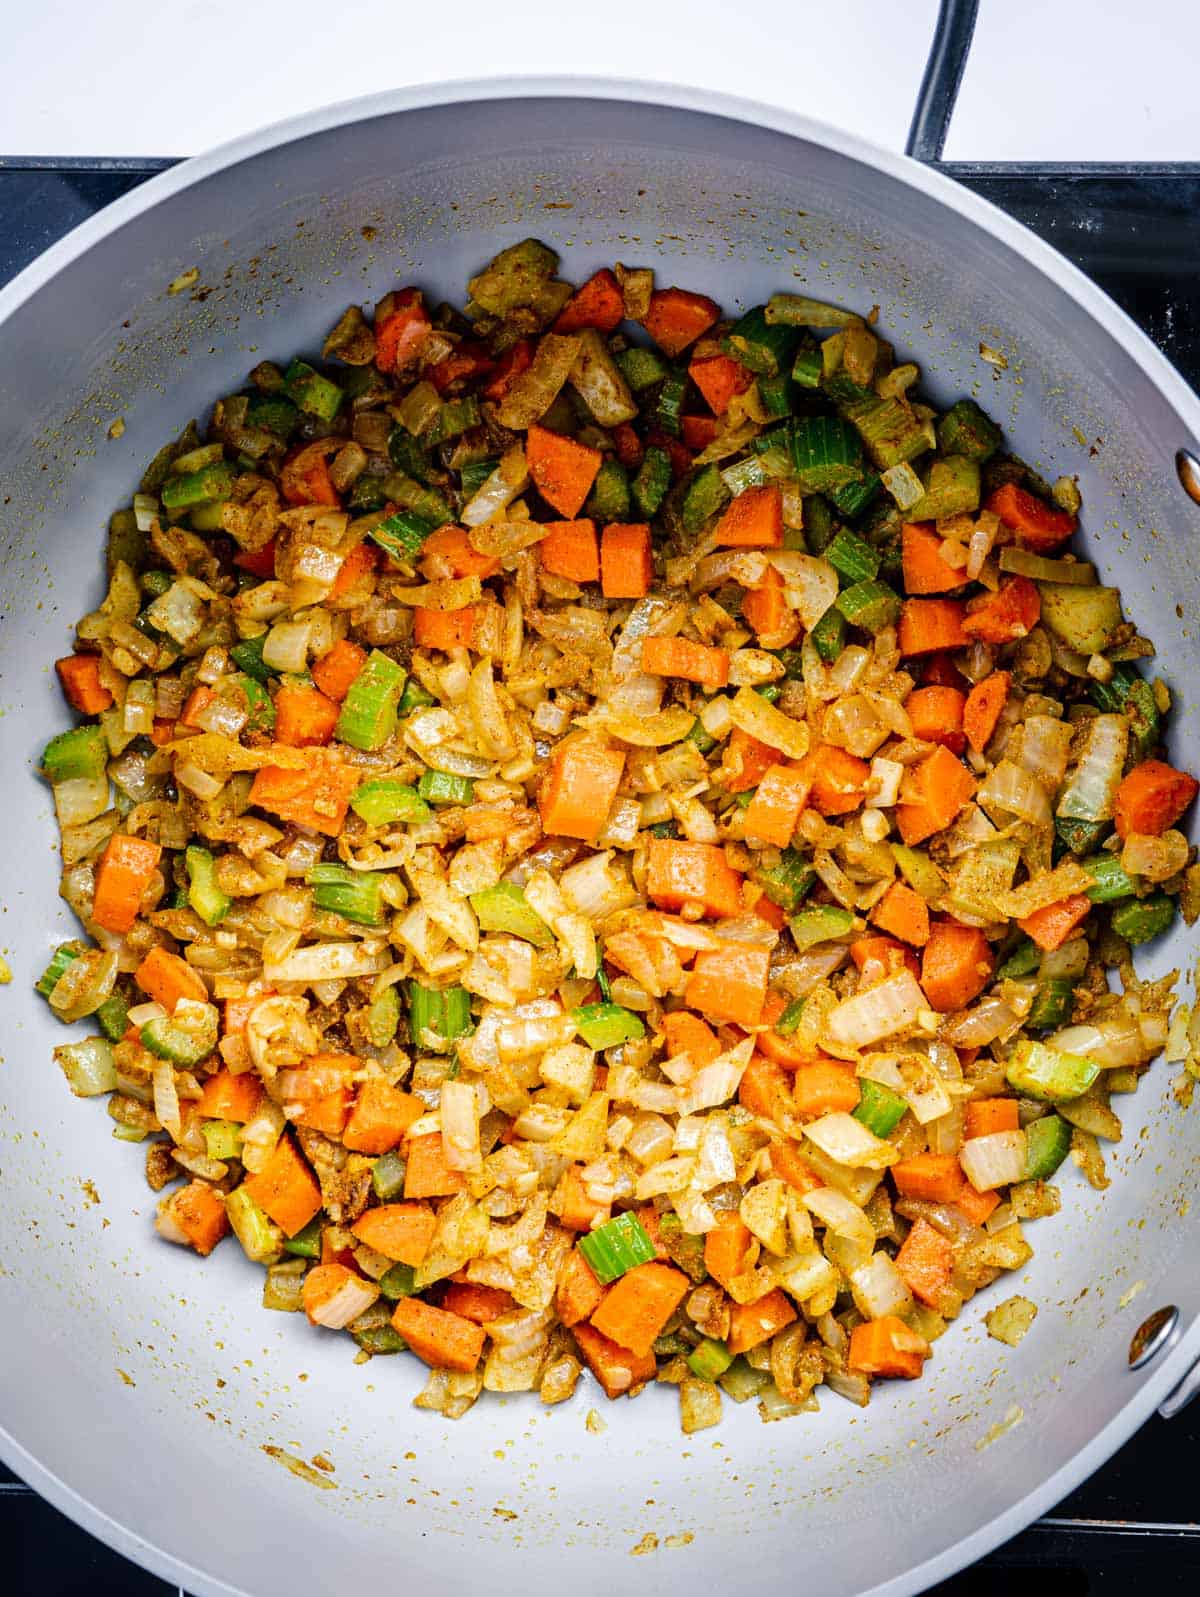 Mirepoix with spices added